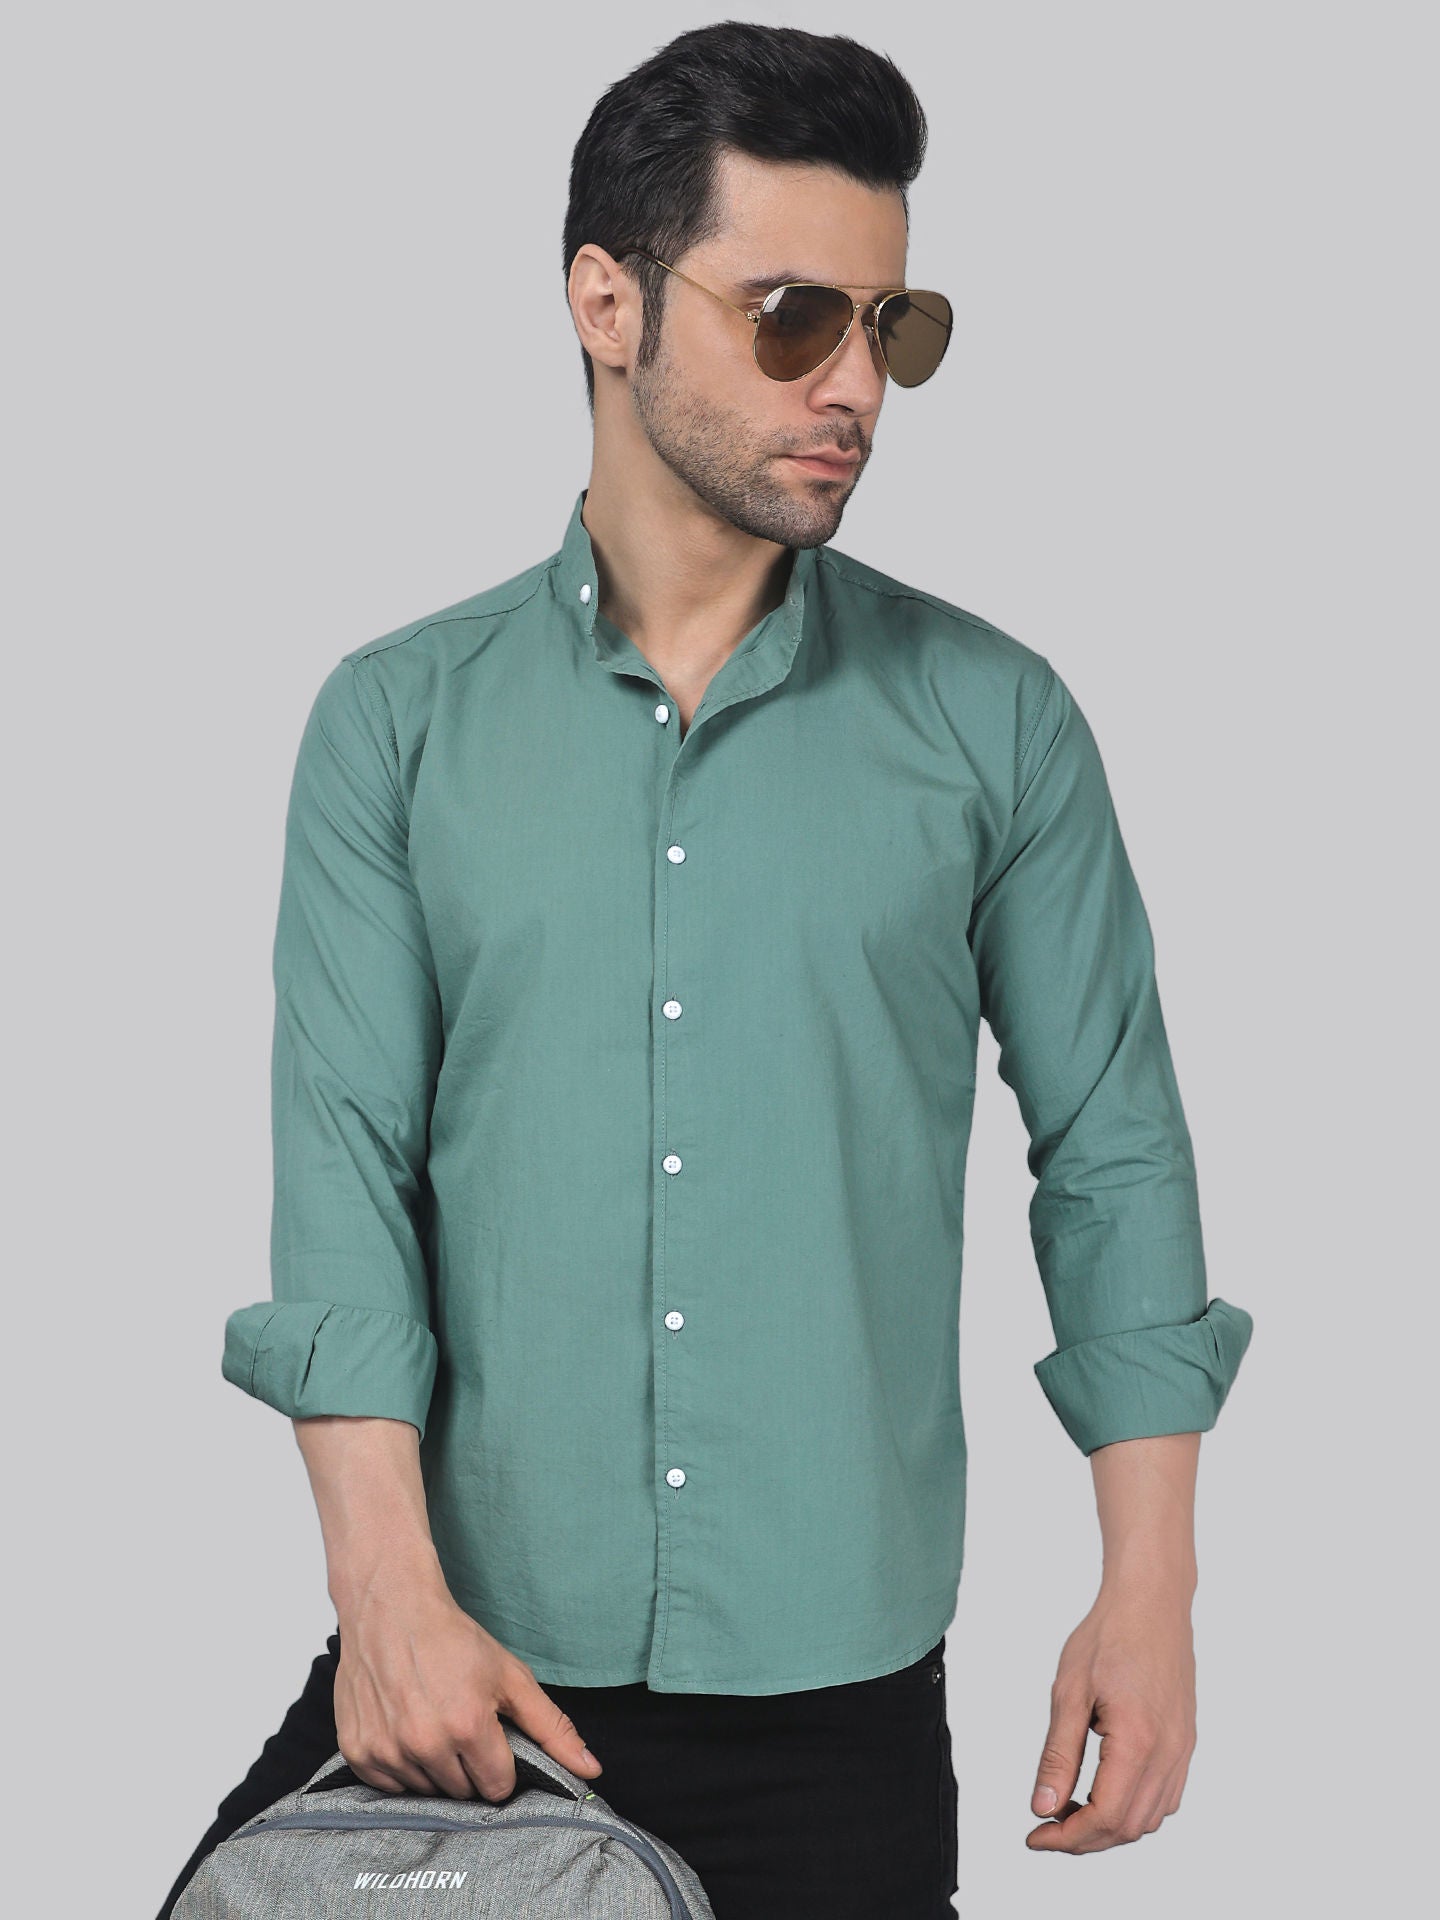 Tribal-fusion TryBuy Premium Mint-Green Cotton Casual Shirt for Men - TryBuy® USA🇺🇸